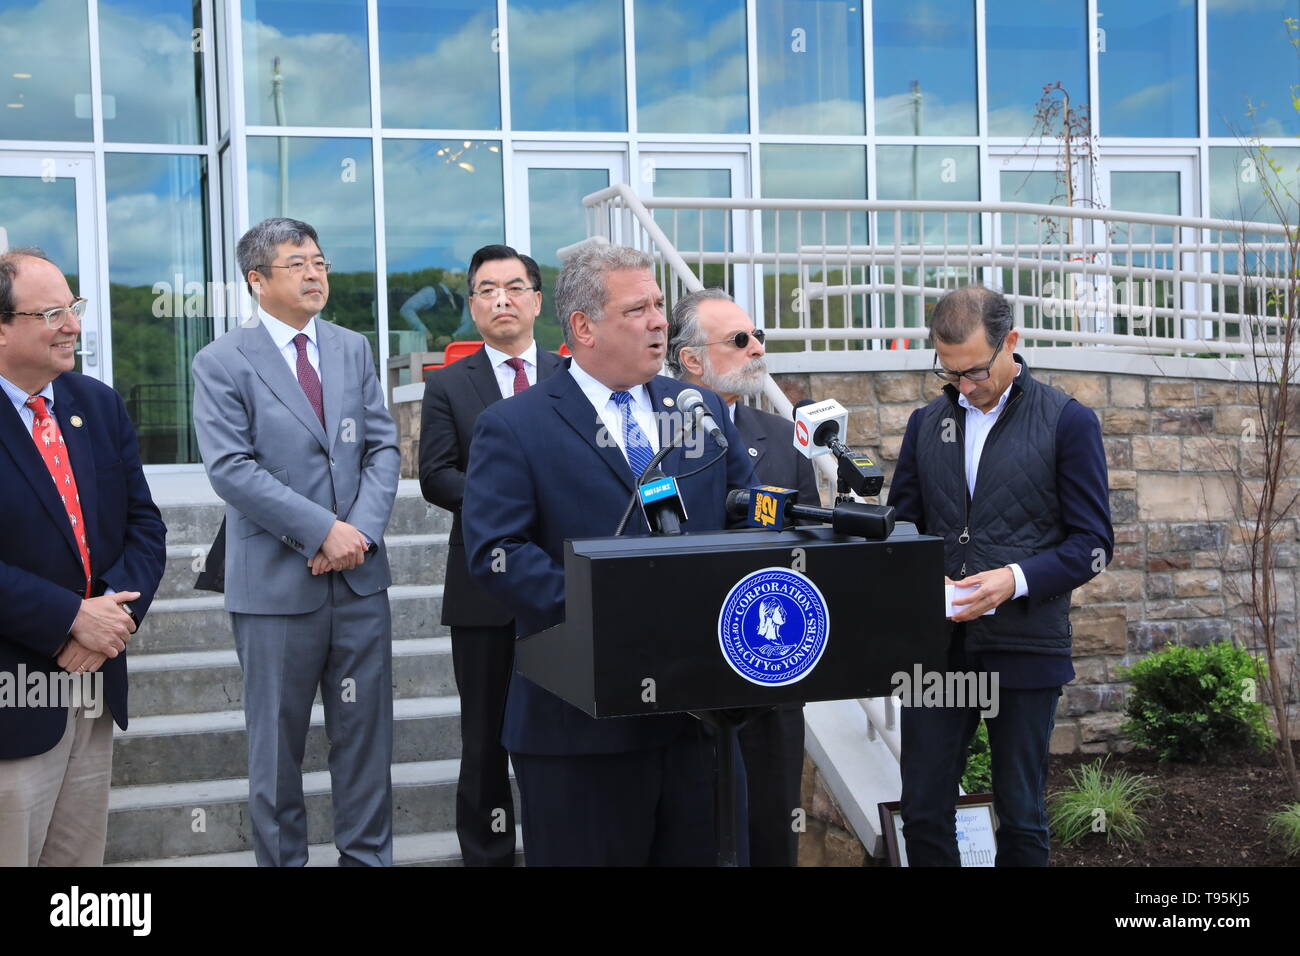 (190516) -- NEW YORK, May 16, 2019 (Xinhua) -- Mike Spano (C), mayor of Yonkers speaks during a ribbon-cutting ceremony in the city of Yonkers, in the U.S. state of New York, on May 15, 2019. A China-invested residential building officially opened on Wednesday in the city of Yonkers, in the U.S. state of New York. The River Club at Hudson Park, a 214-unit luxury apartment building, is a public-private partnership project developed by China Construction America (CCA) since 2015. It helped complete the three-phased Hudson Park development plan that was started more than two decades ago, which ai Stock Photo